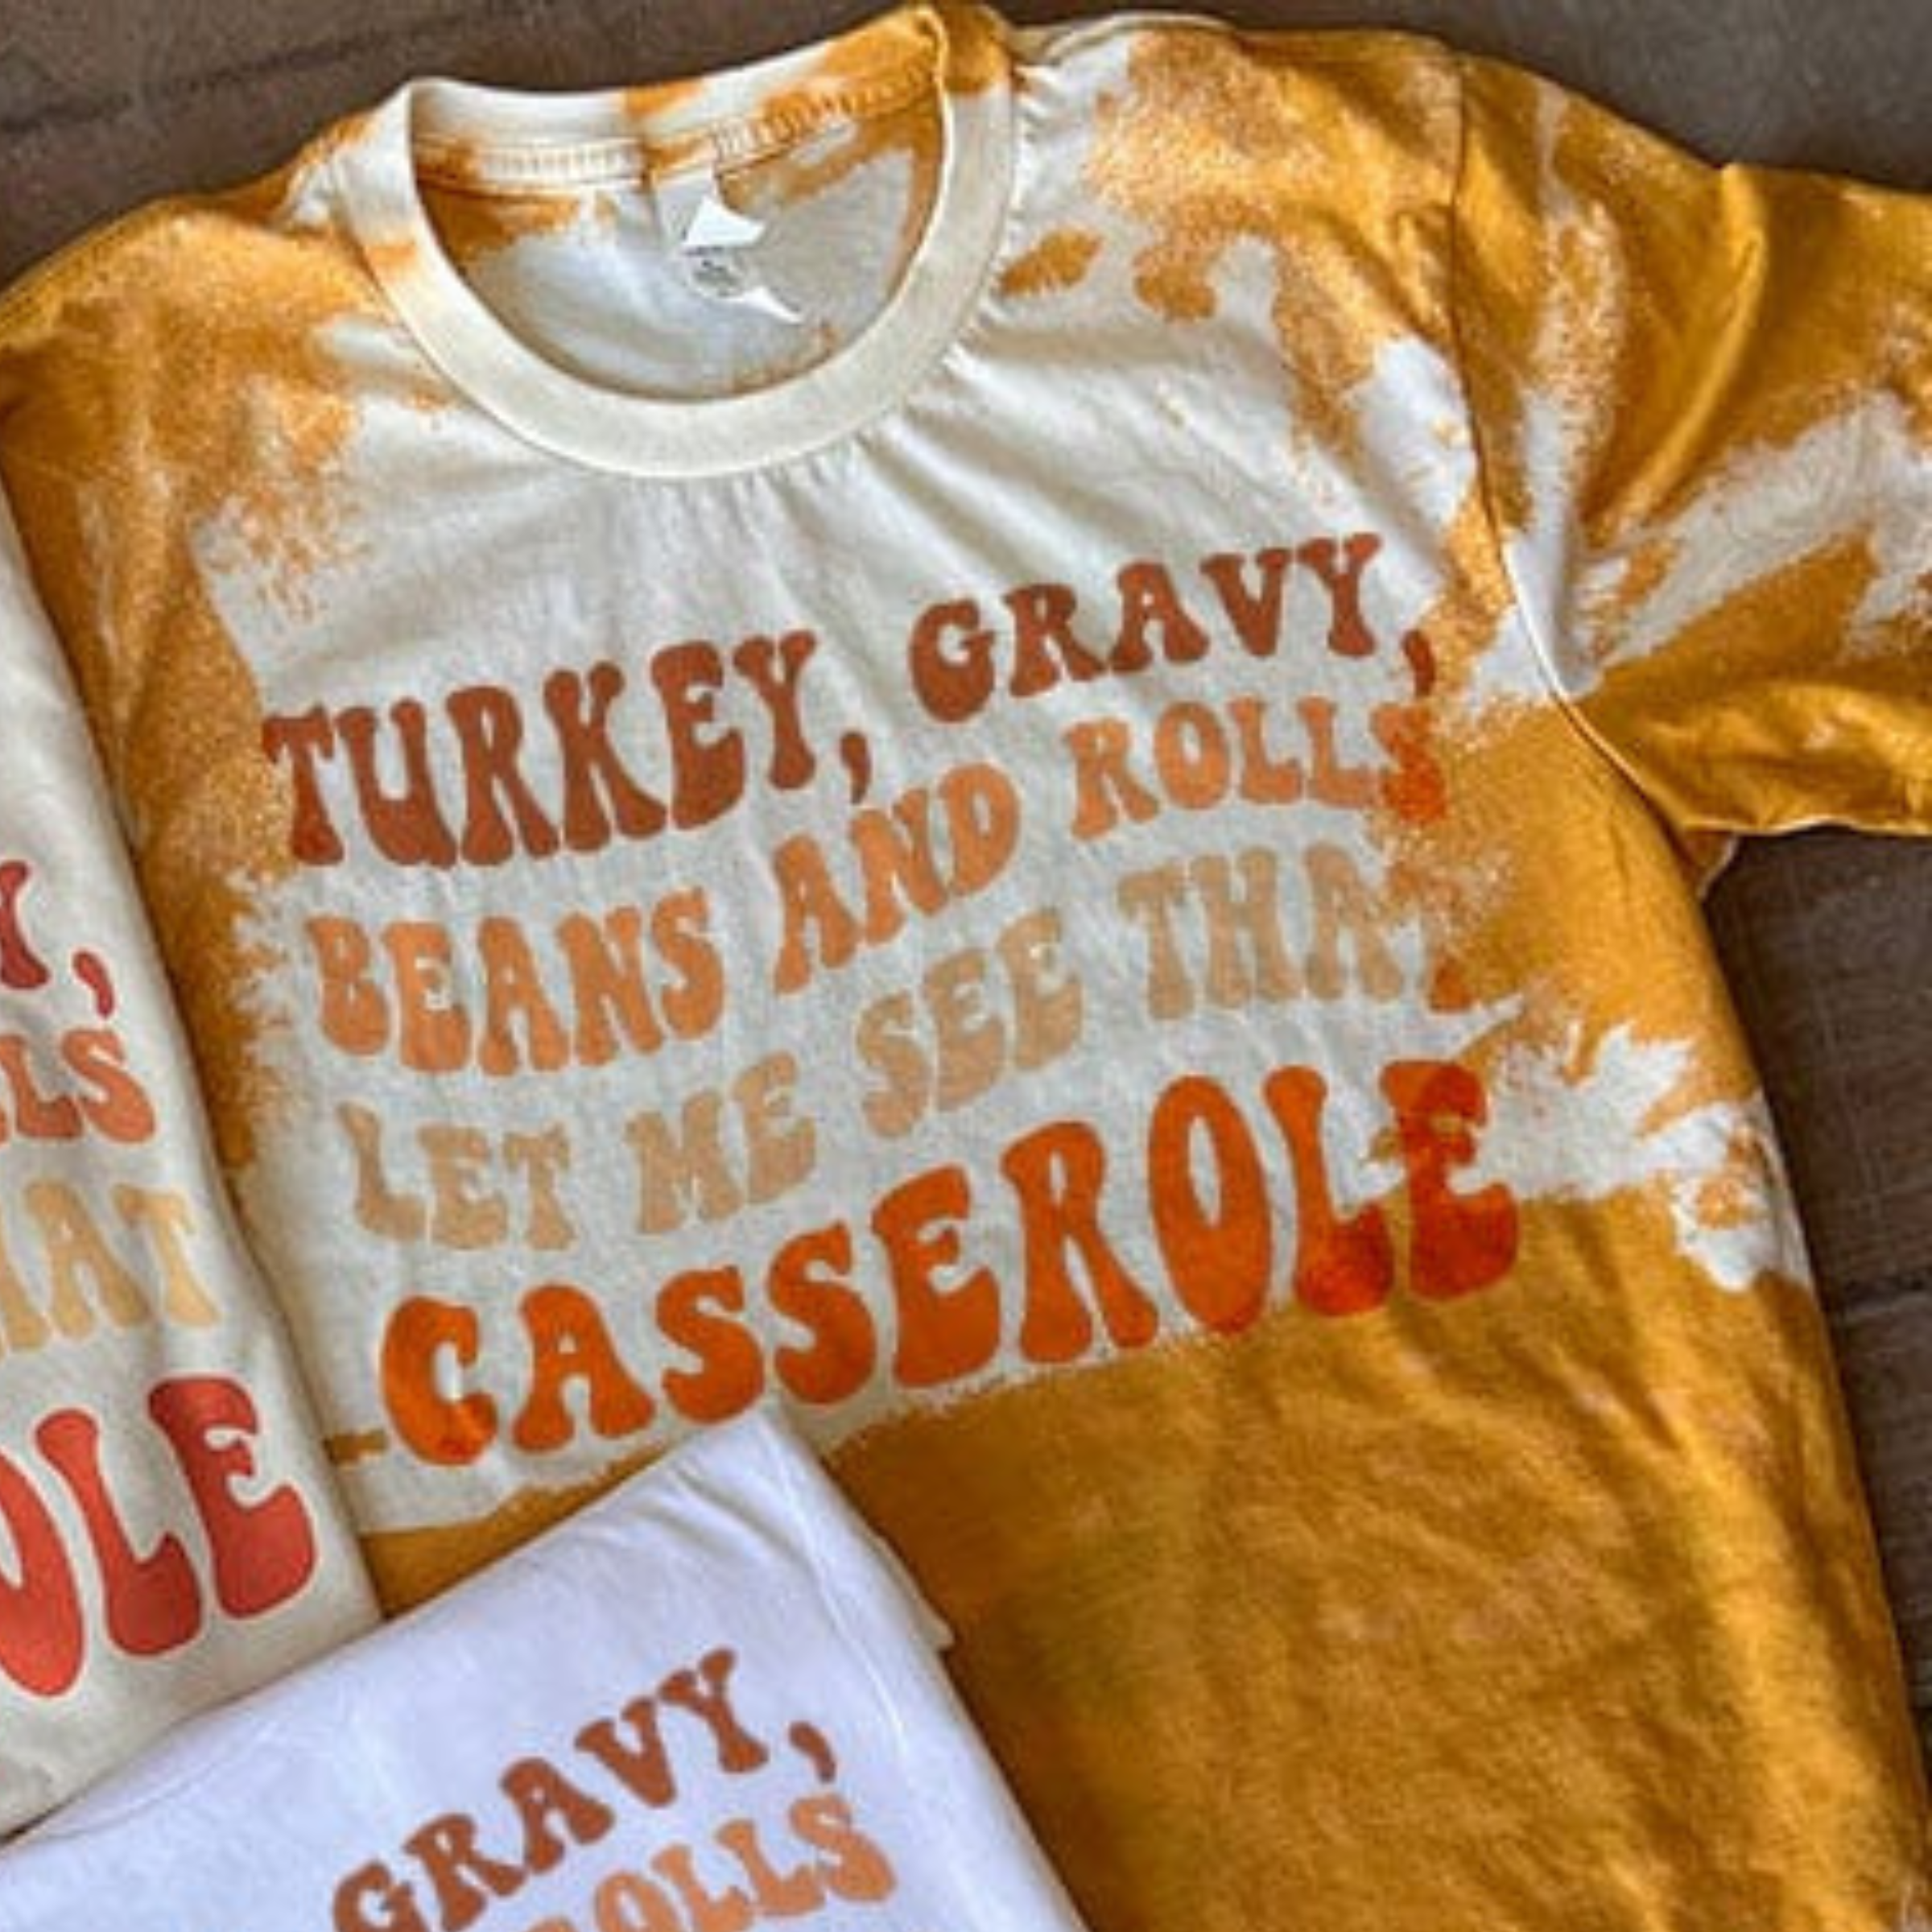 This bleached mustard yellow top includes a crew neckline, short sleeves, and a hand drawn graphic with words "Turkey, Gravy, Beans and Rolls, Let Me See That Casserole" in fun, Fall colors. This is a Bella + Canvas Tee, and shown here as a flat lay. 